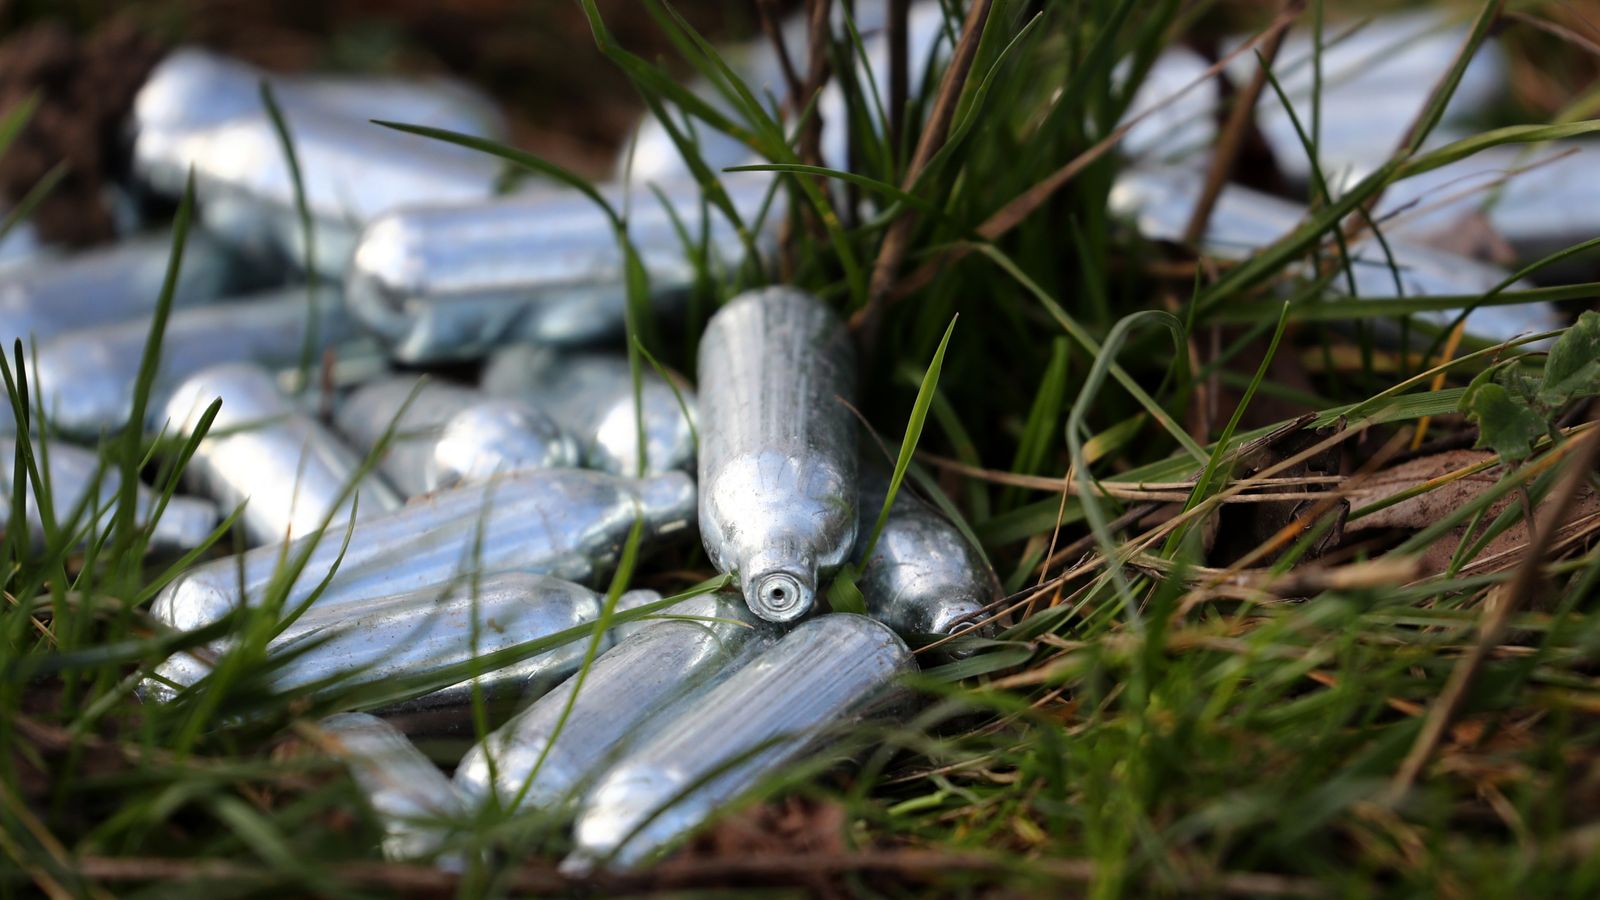 Nitrous oxide: Recreational use of laughing gas banned in the UK